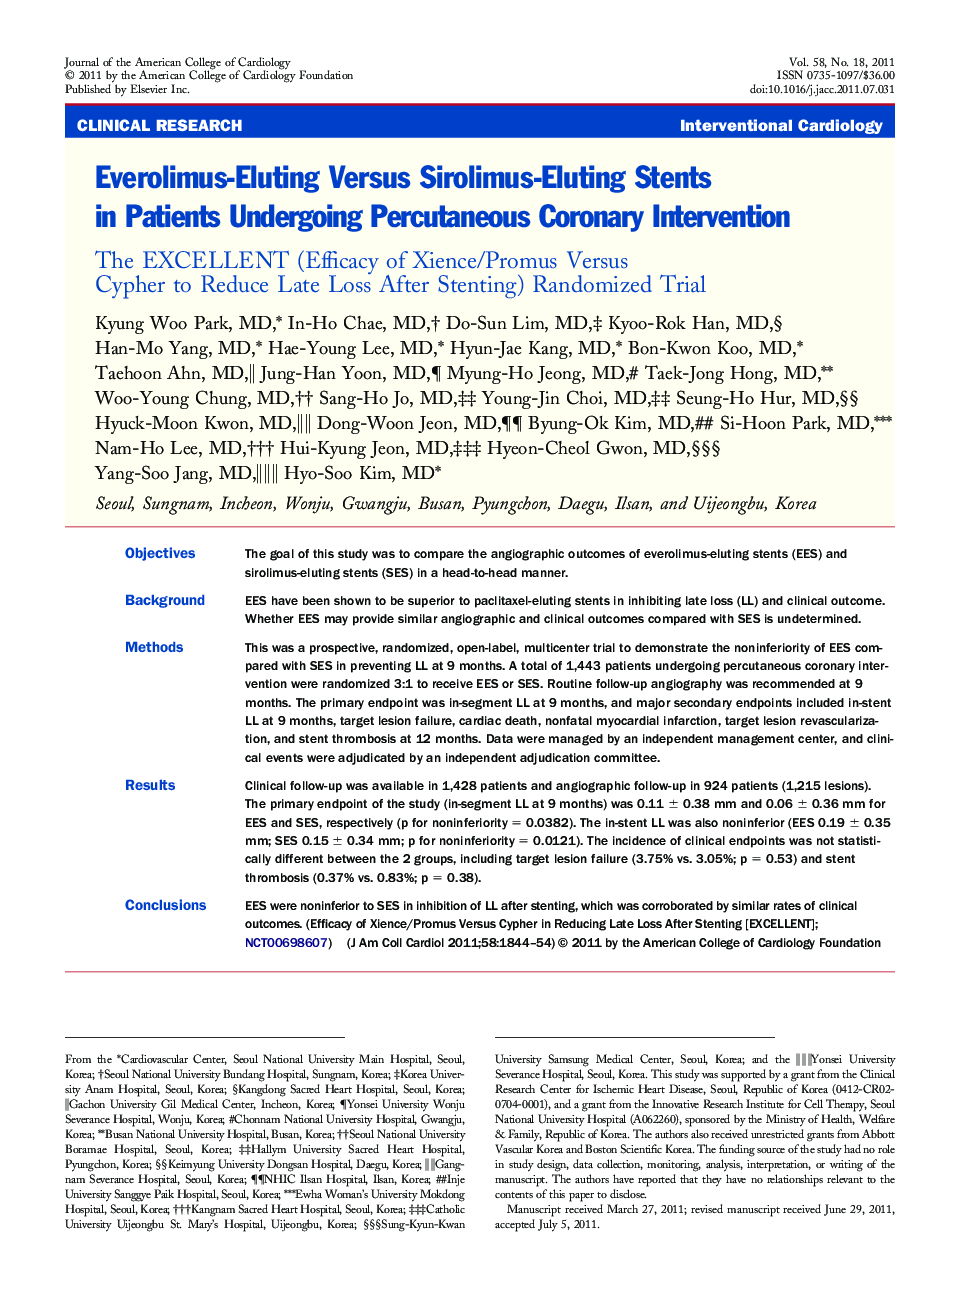 Everolimus-Eluting Versus Sirolimus-Eluting Stents in Patients Undergoing Percutaneous Coronary Intervention: The EXCELLENT (Efficacy of Xience/Promus Versus Cypher to Reduce Late Loss After Stenting) Randomized Trial